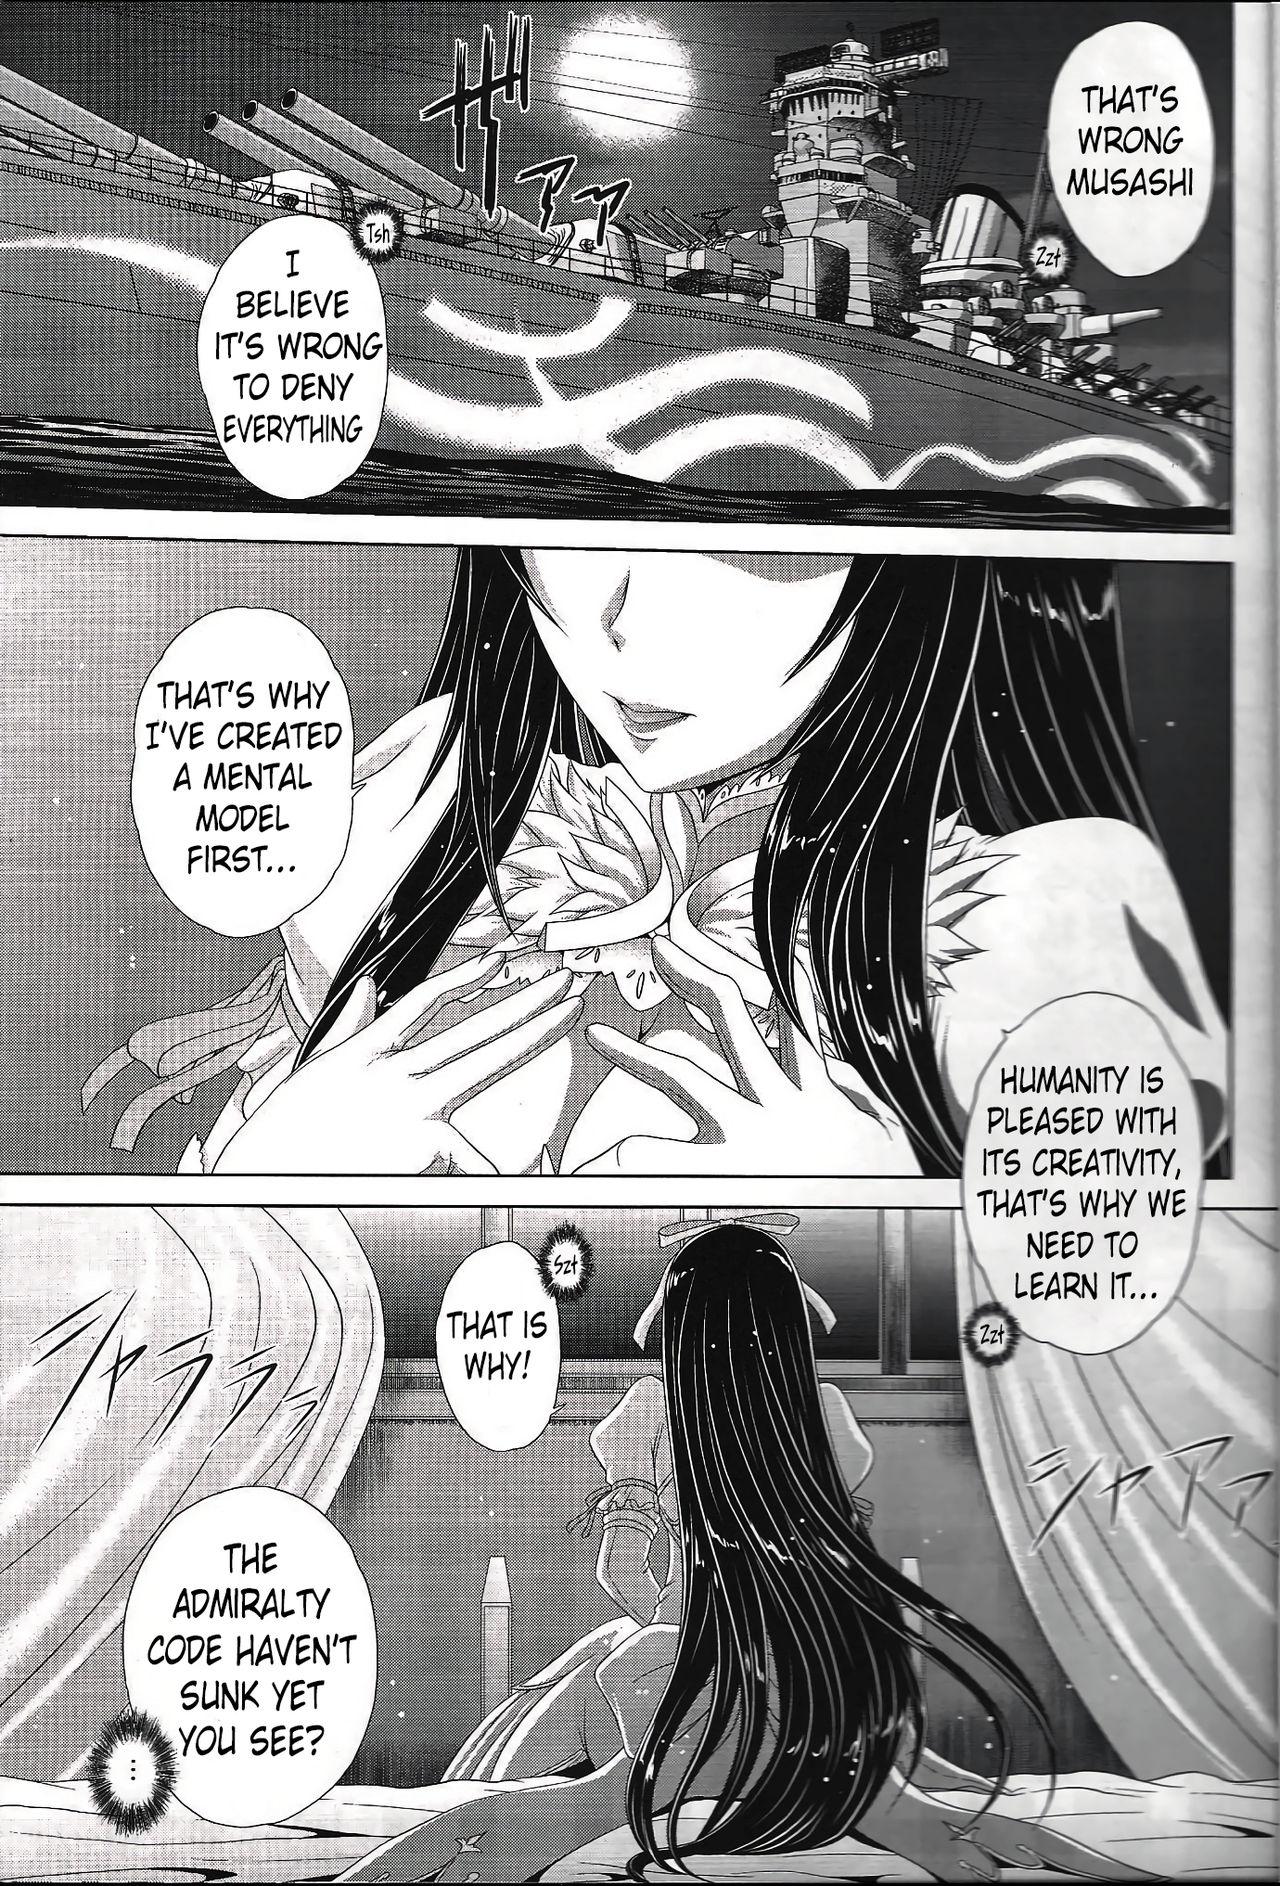 Whipping Sou Kikan Tsushin | Transmission from the Supreme Flagship - Arpeggio of blue steel Tattooed - Page 2